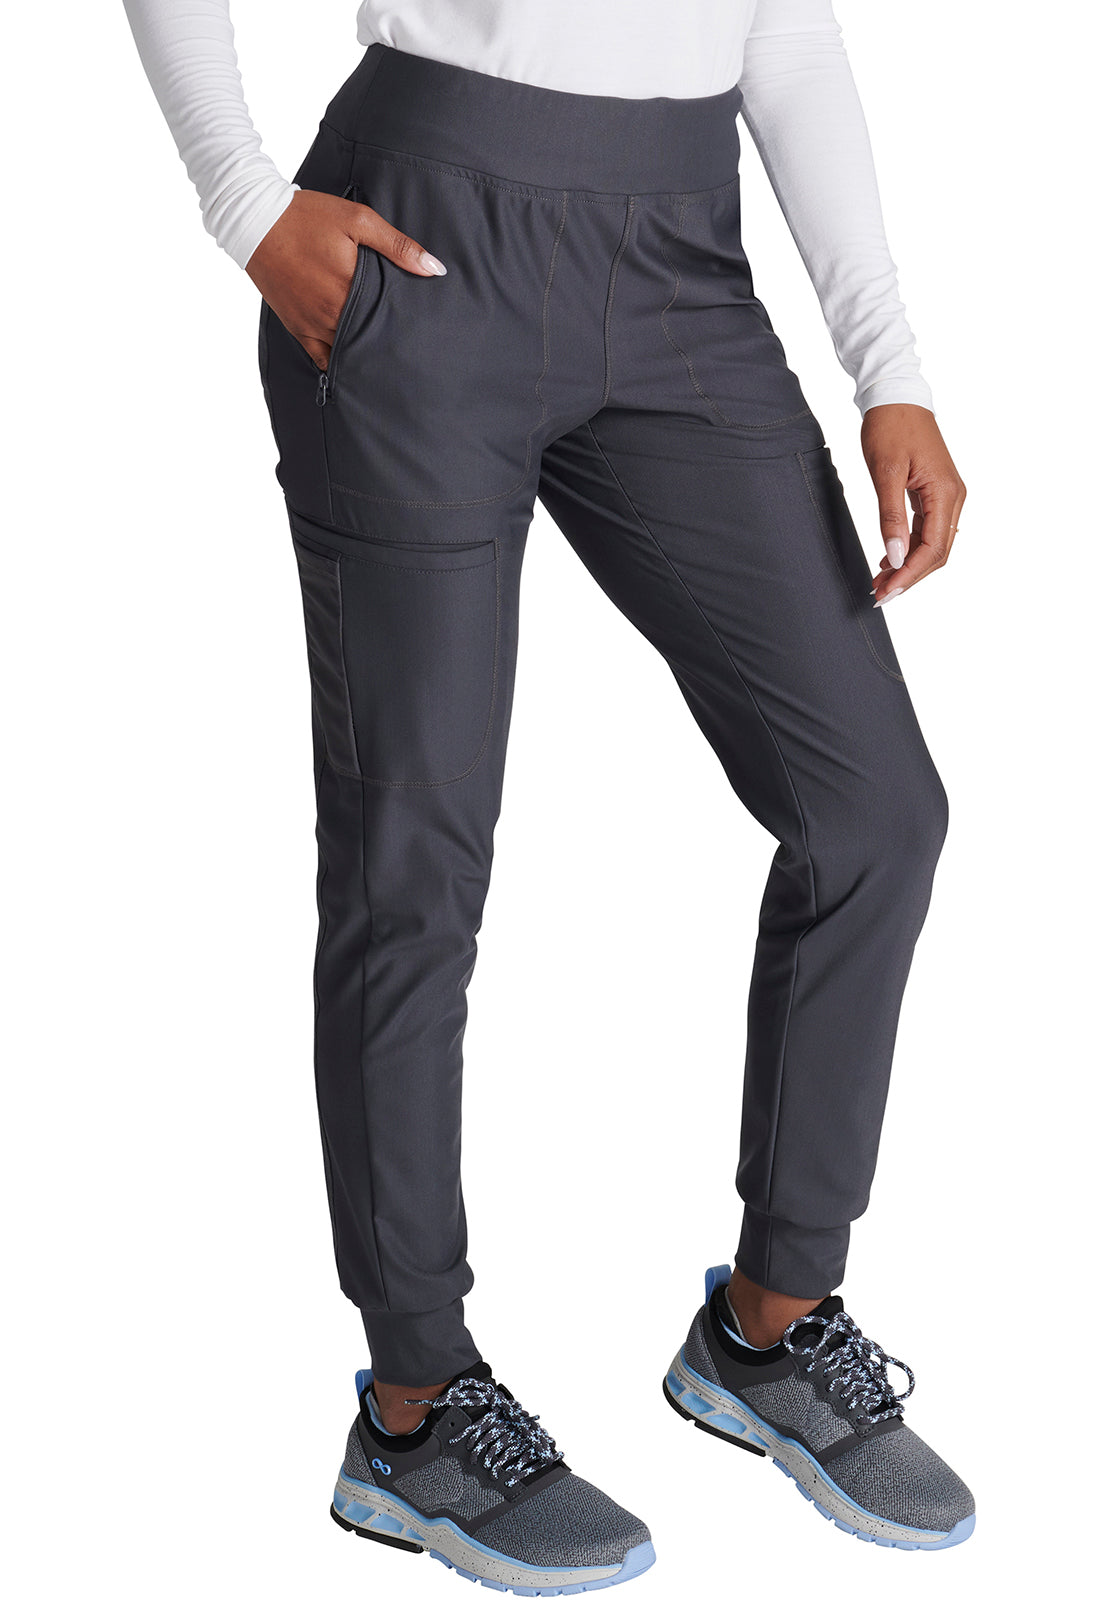 FORM Mid Rise Tapered Leg Drawstring Pant with Cargo Pocket